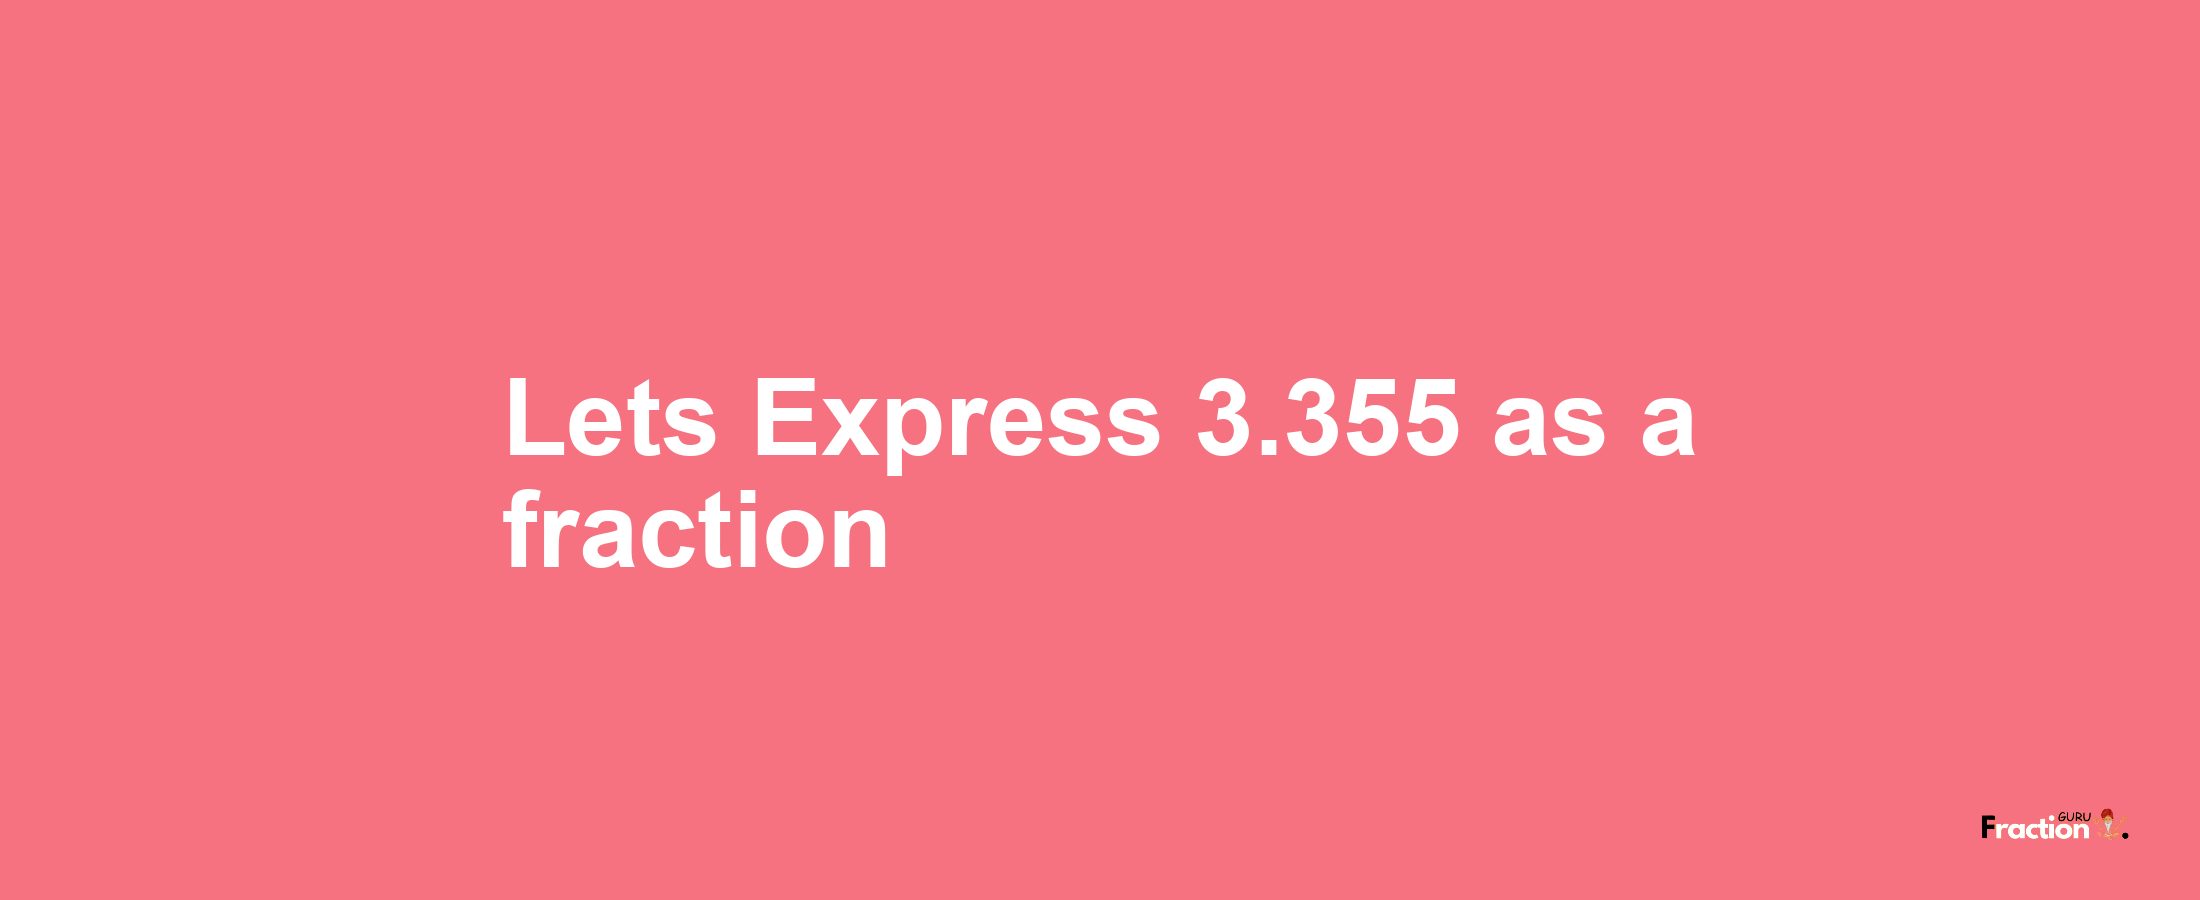 Lets Express 3.355 as afraction